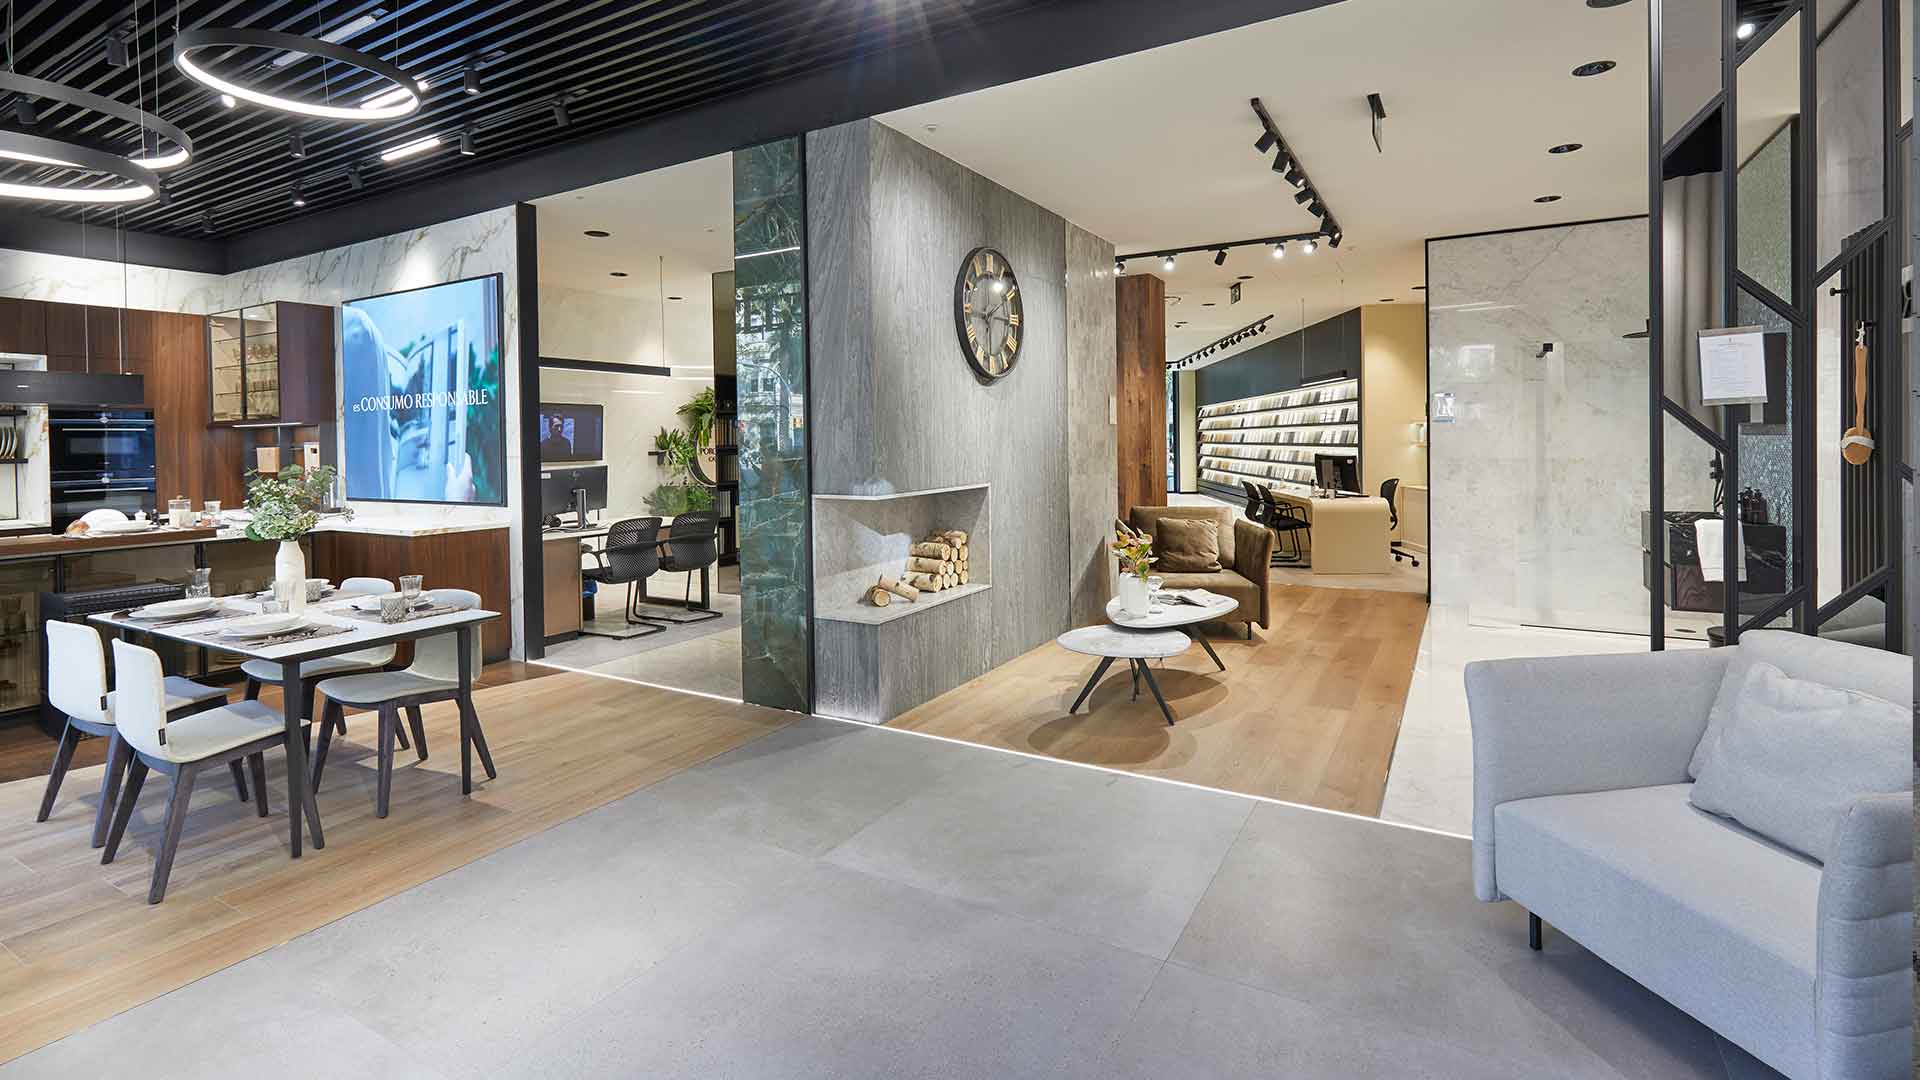 Porcelanosa has commissioned Grup Idea and Abessis to implement and build a new showroom on Avenida Diagonal in Barcelona.